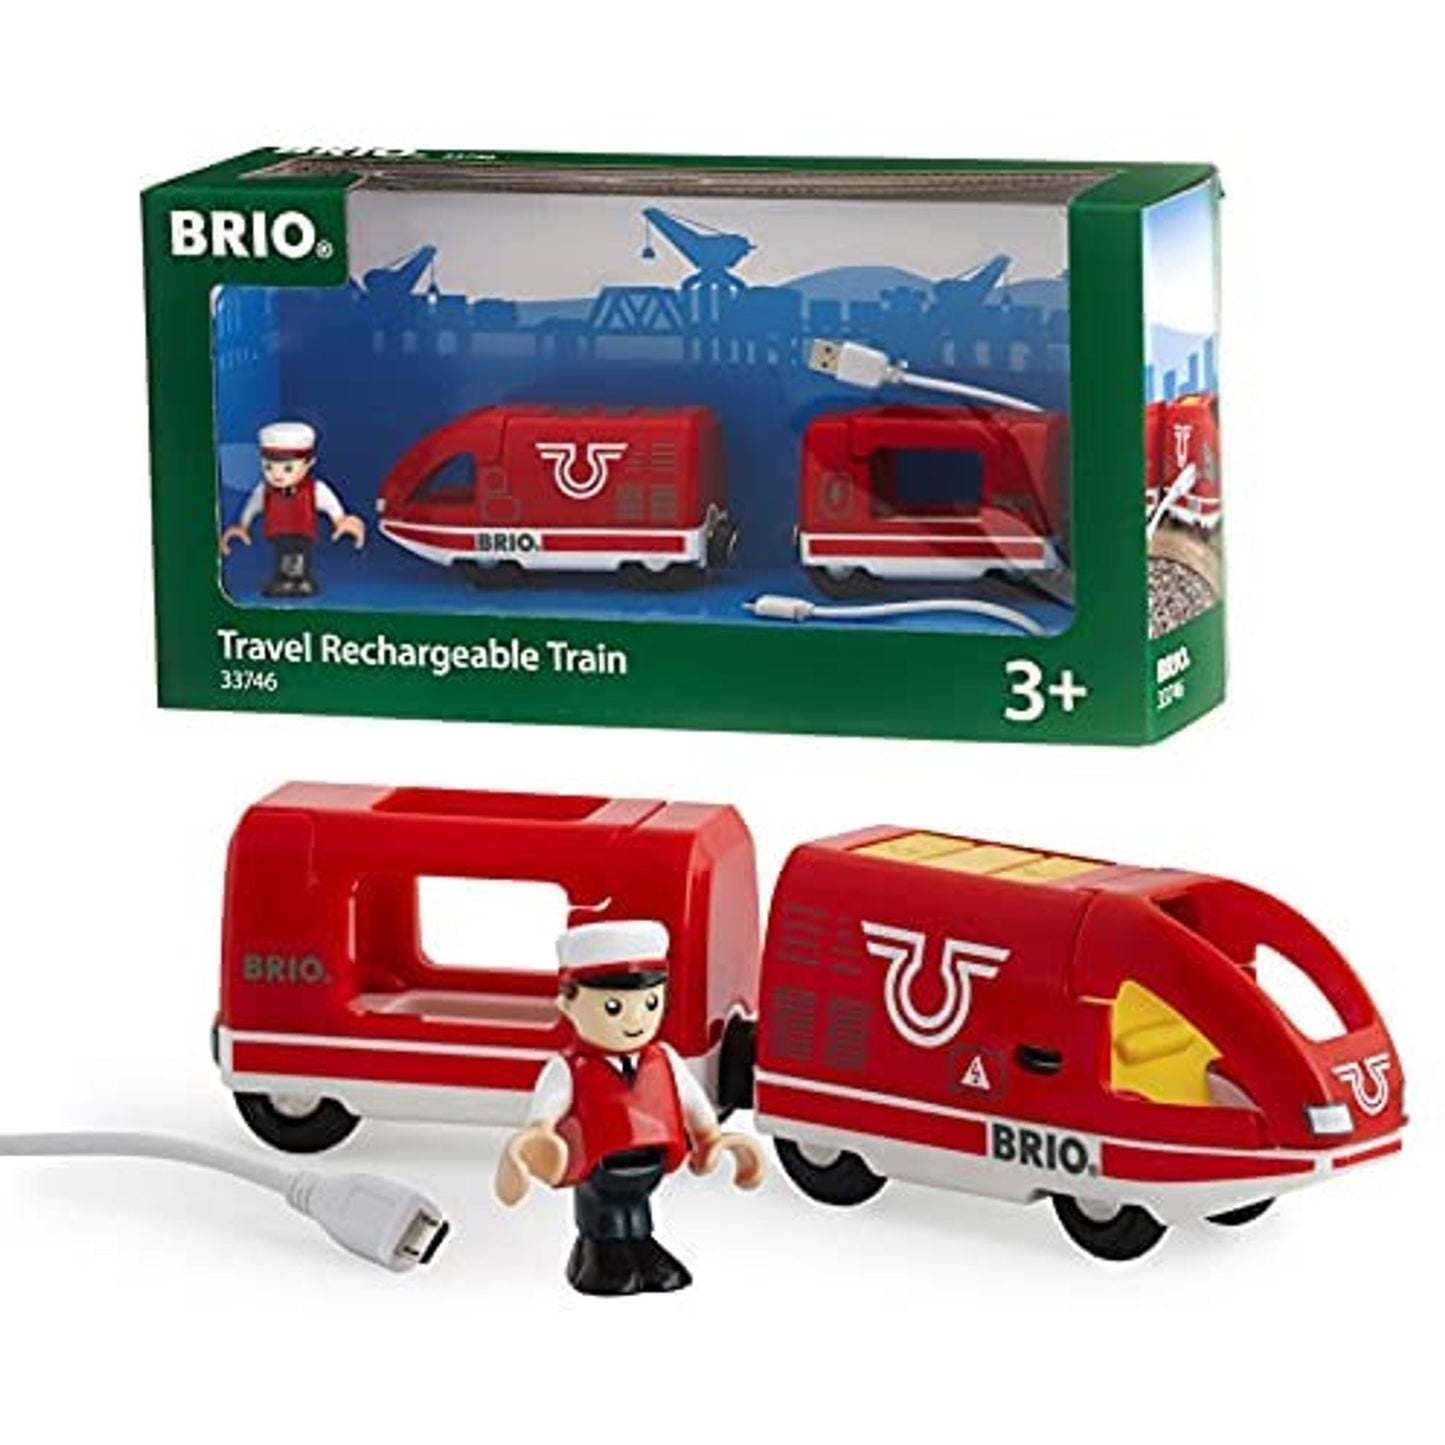 BRIO Train - Travel Rechargeable Train 4 pieces - Toybox Tales